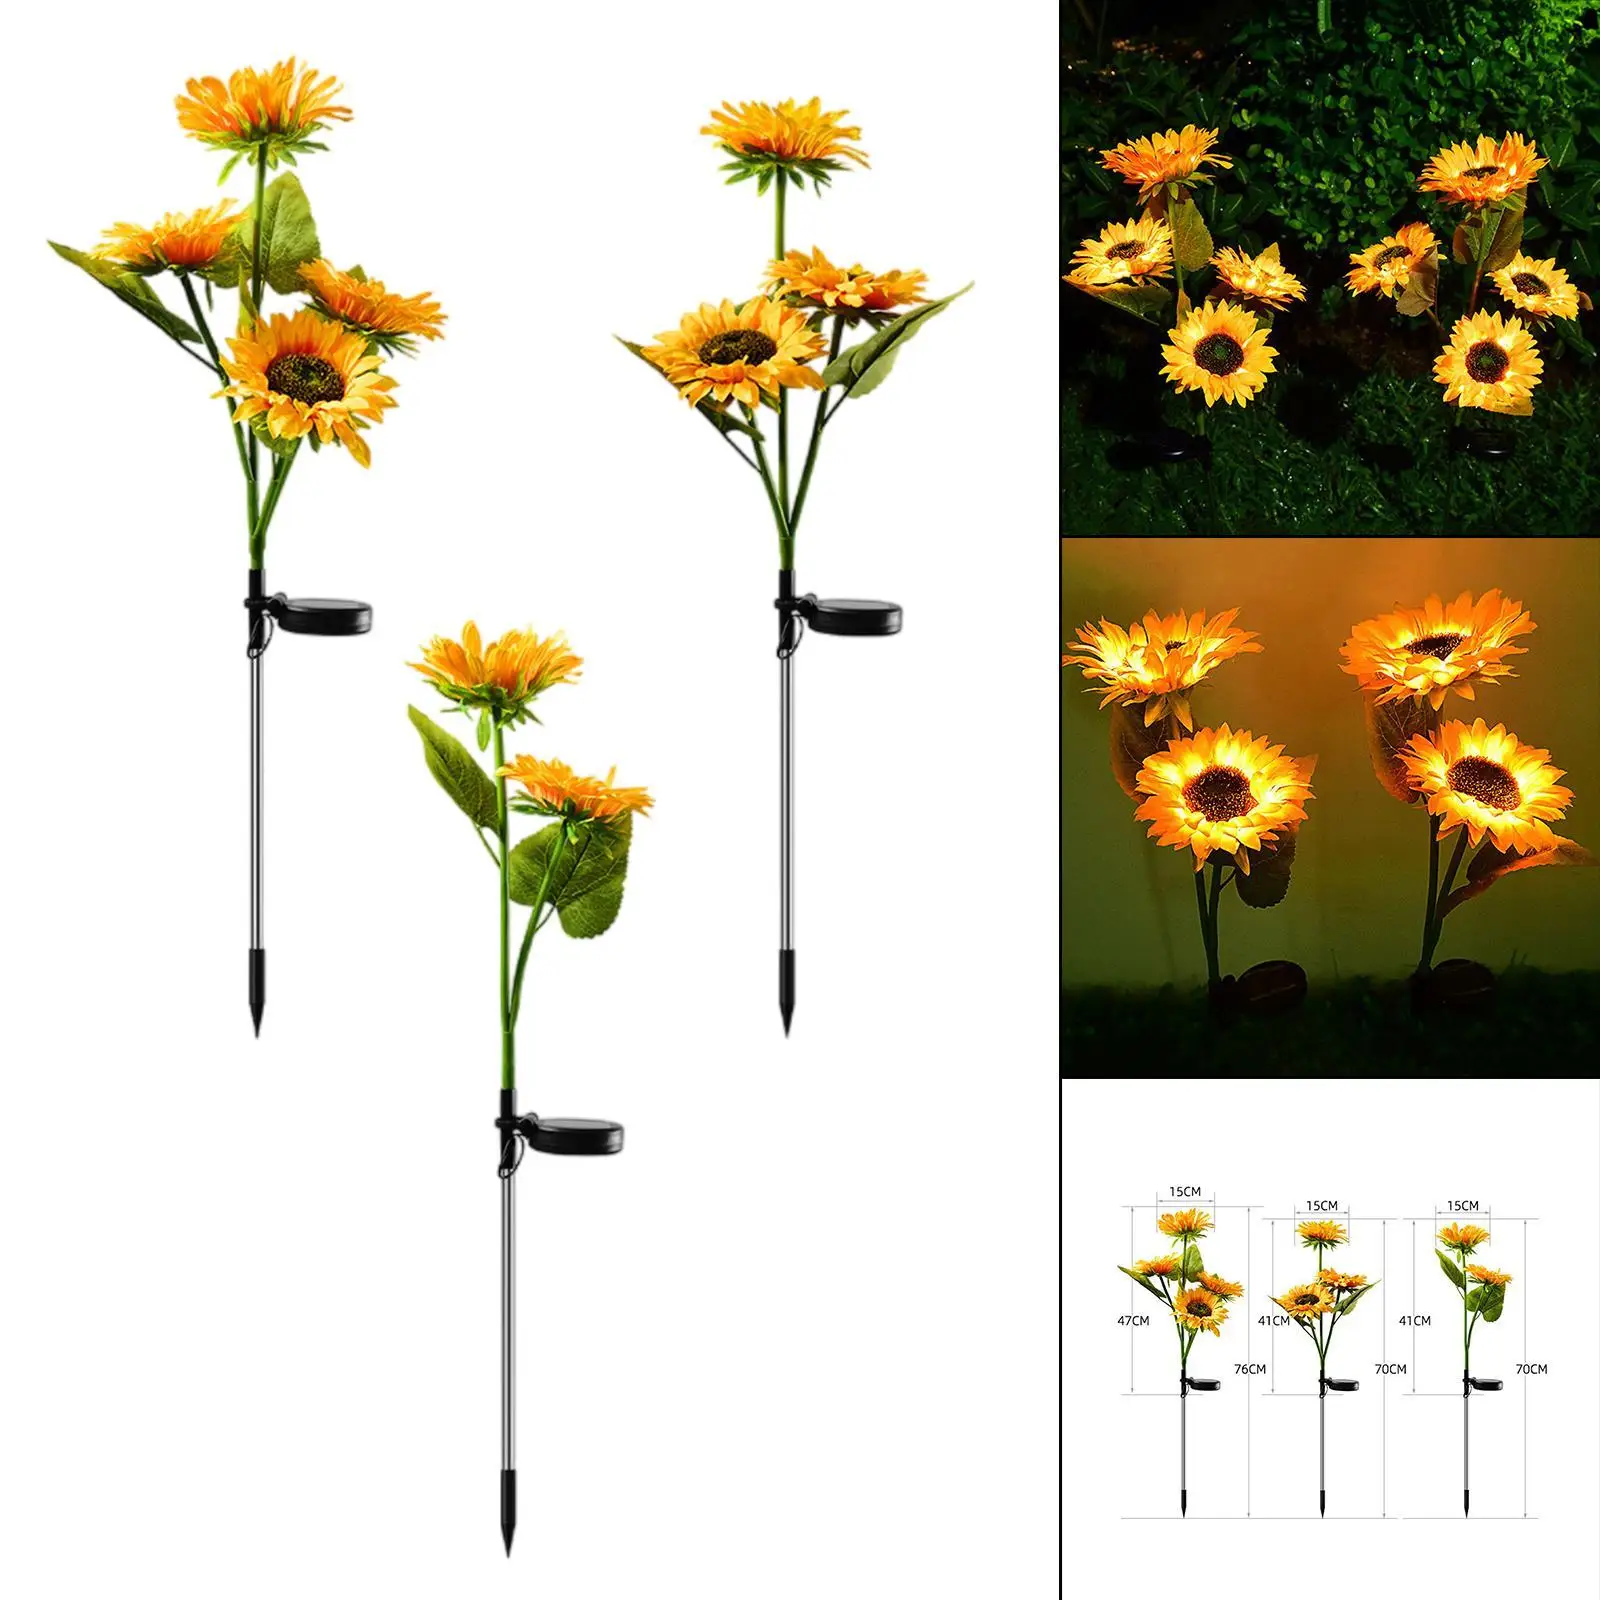  Lights LED Panel in-Ground Garden Stake Lamp for Yard Outside Lawn